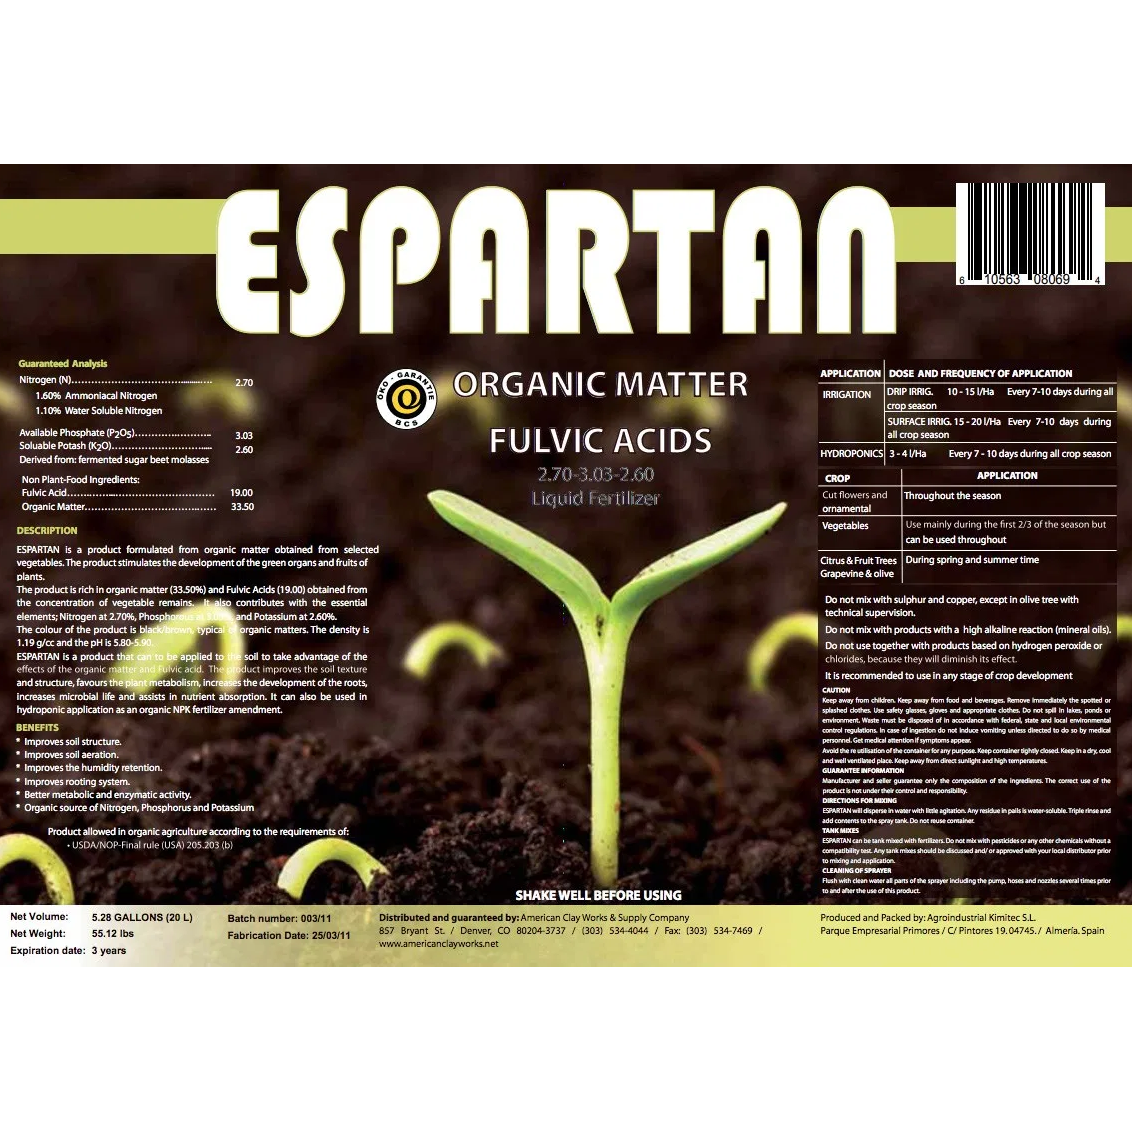 TAS Espartan is an organic master fertilizer specially formulated for selected vegetables. This high-quality fertilizer contains a rich concentration of organic matter, providing essential nutrients to optimize the growth and yield of your crops.